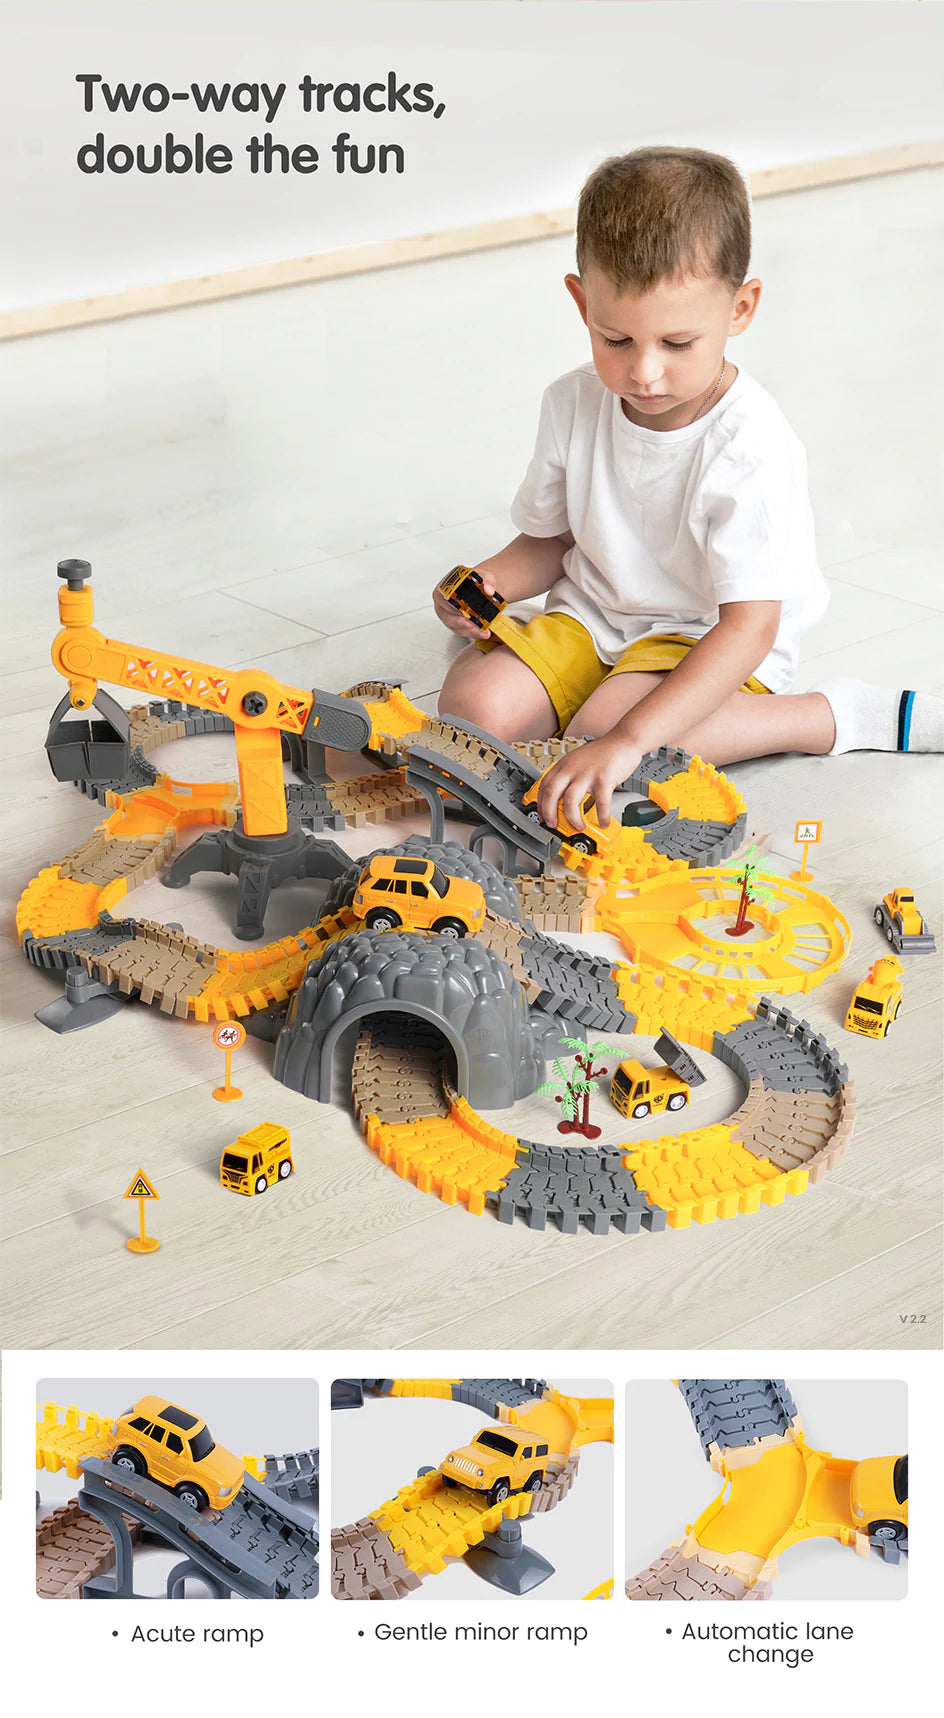 Vehicle toys for construction themed race track excitement